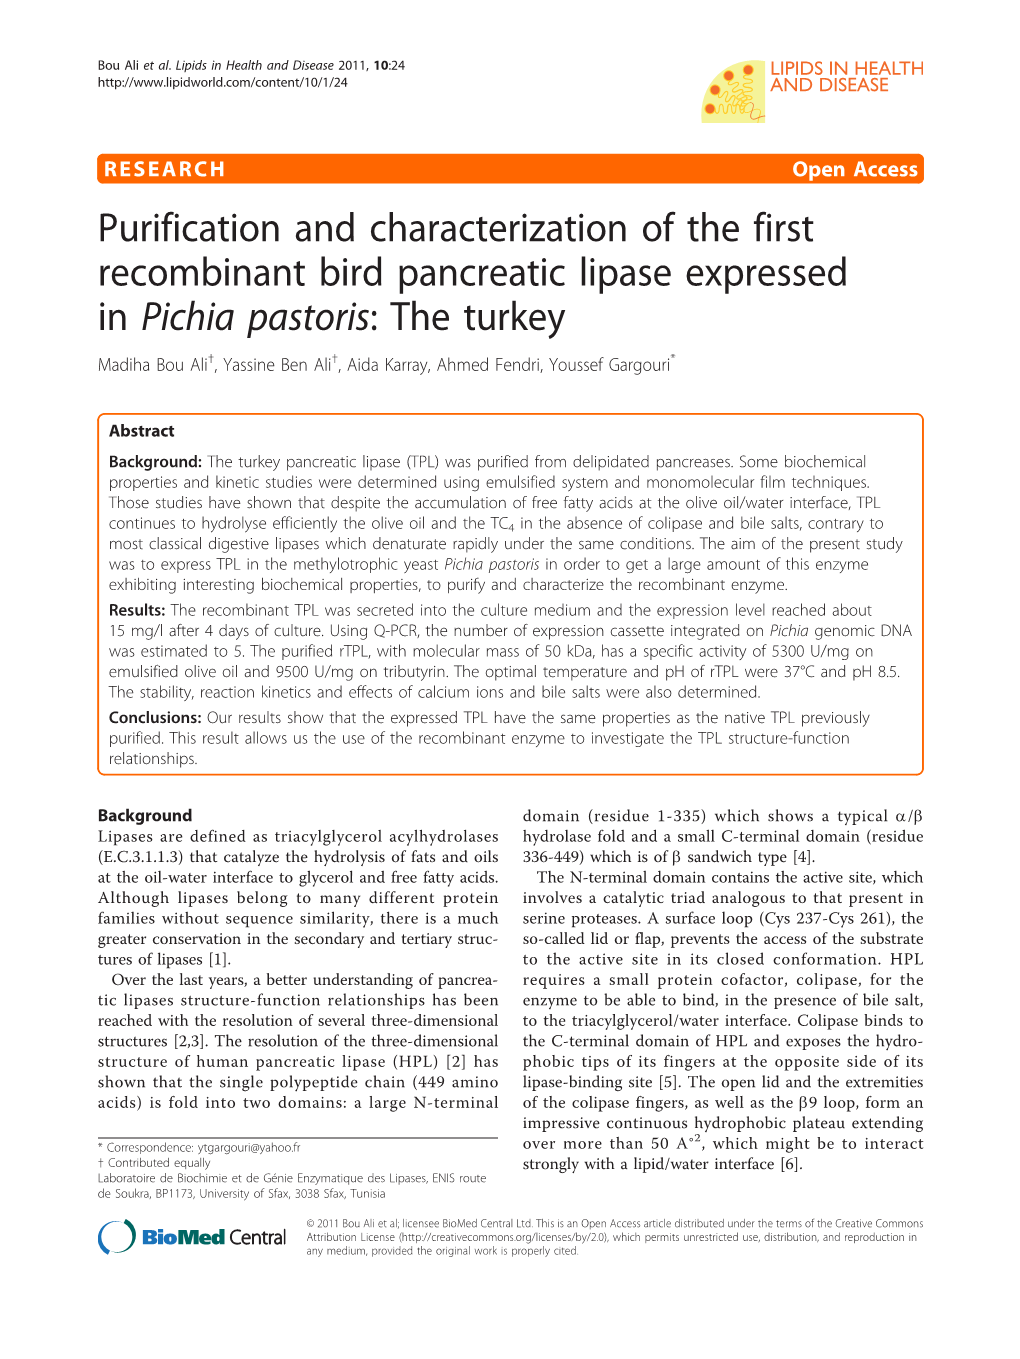 Purification and Characterization of the First